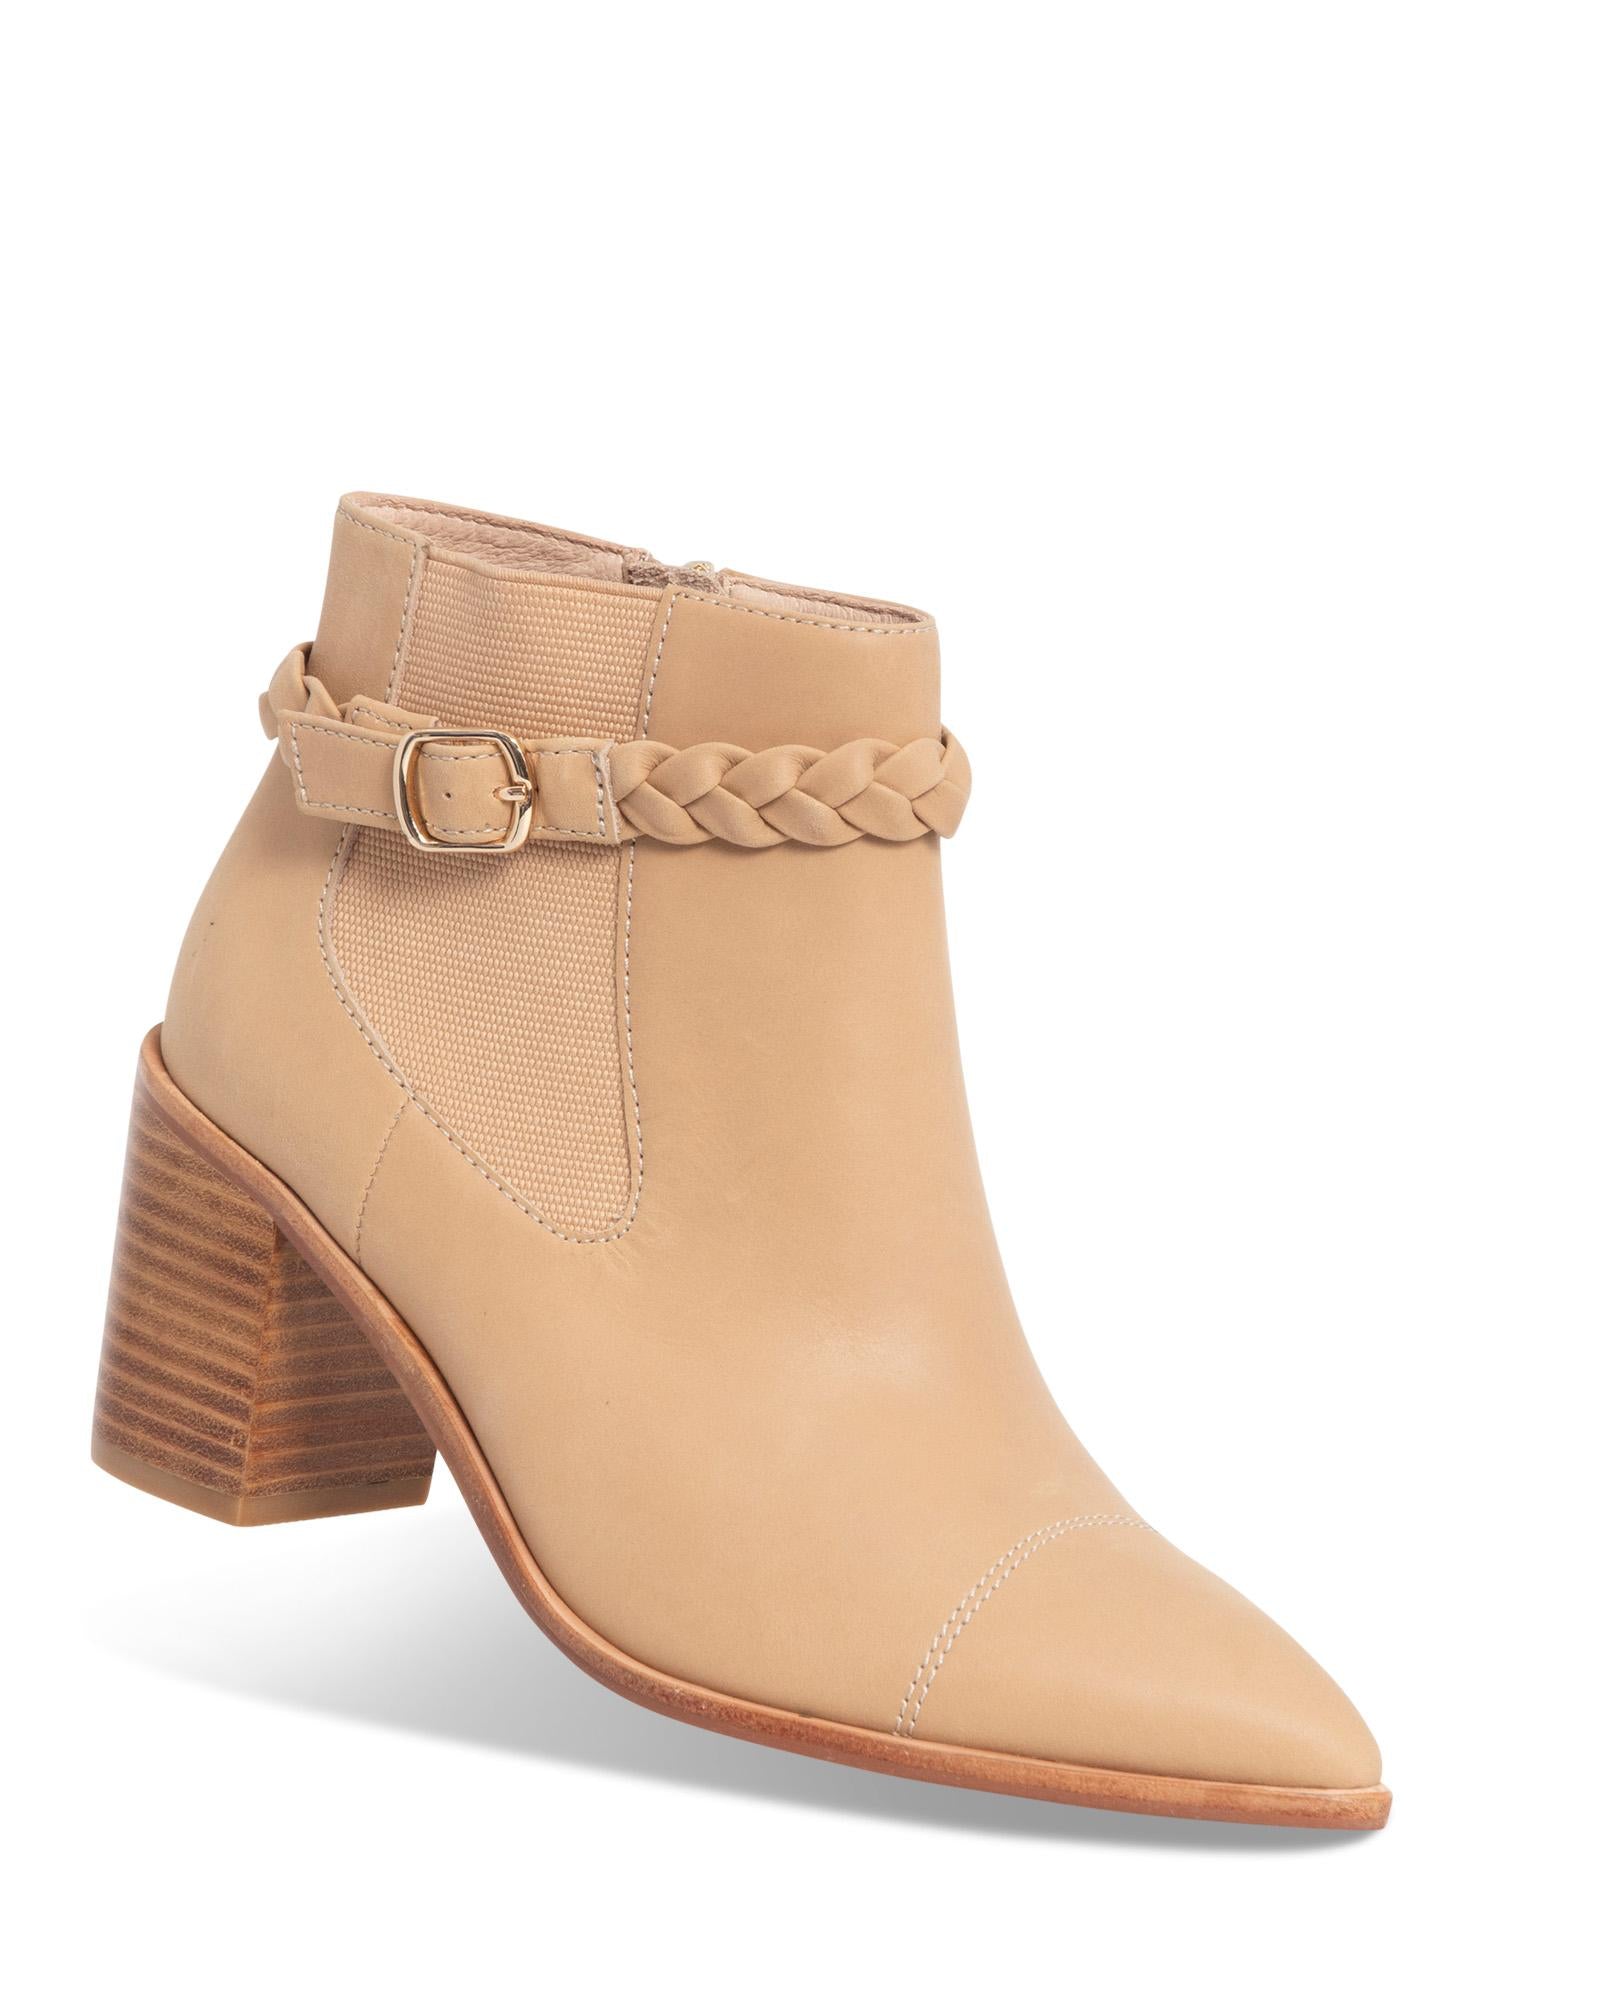 Margo Natural 7cm Ankle Boot